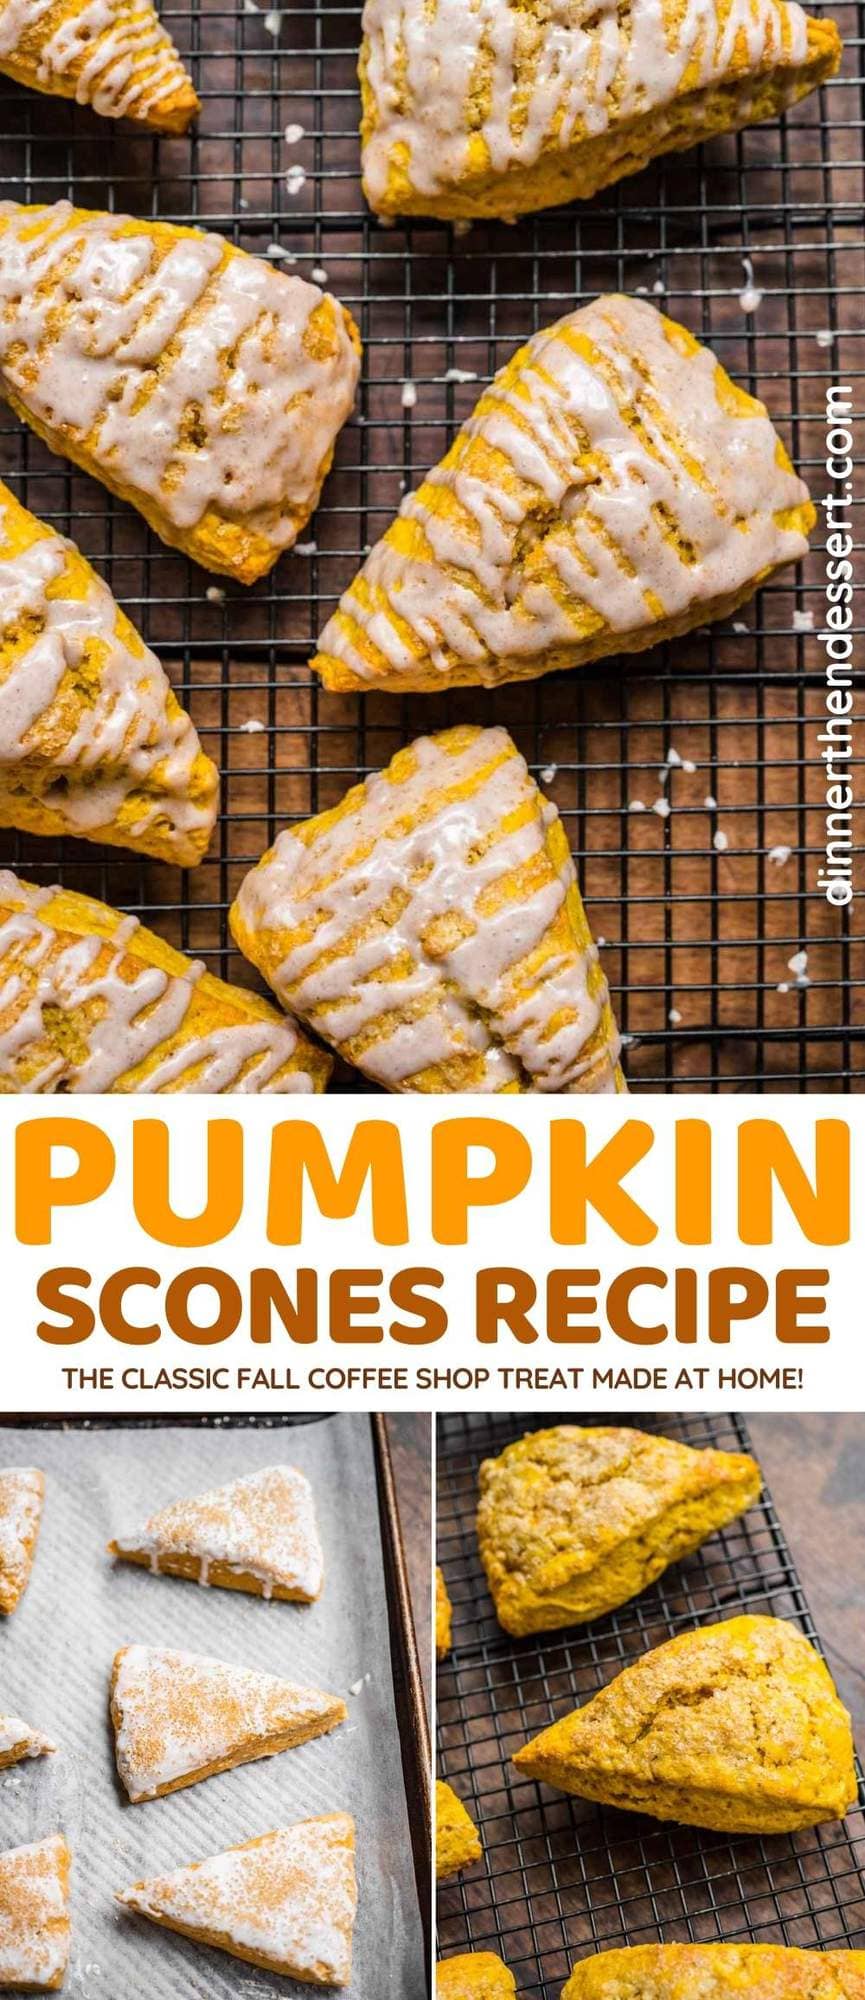 Collage of three Pumpkin Scones Photos: ready to bake, fresh out of the oven, and drizzled with frosting.